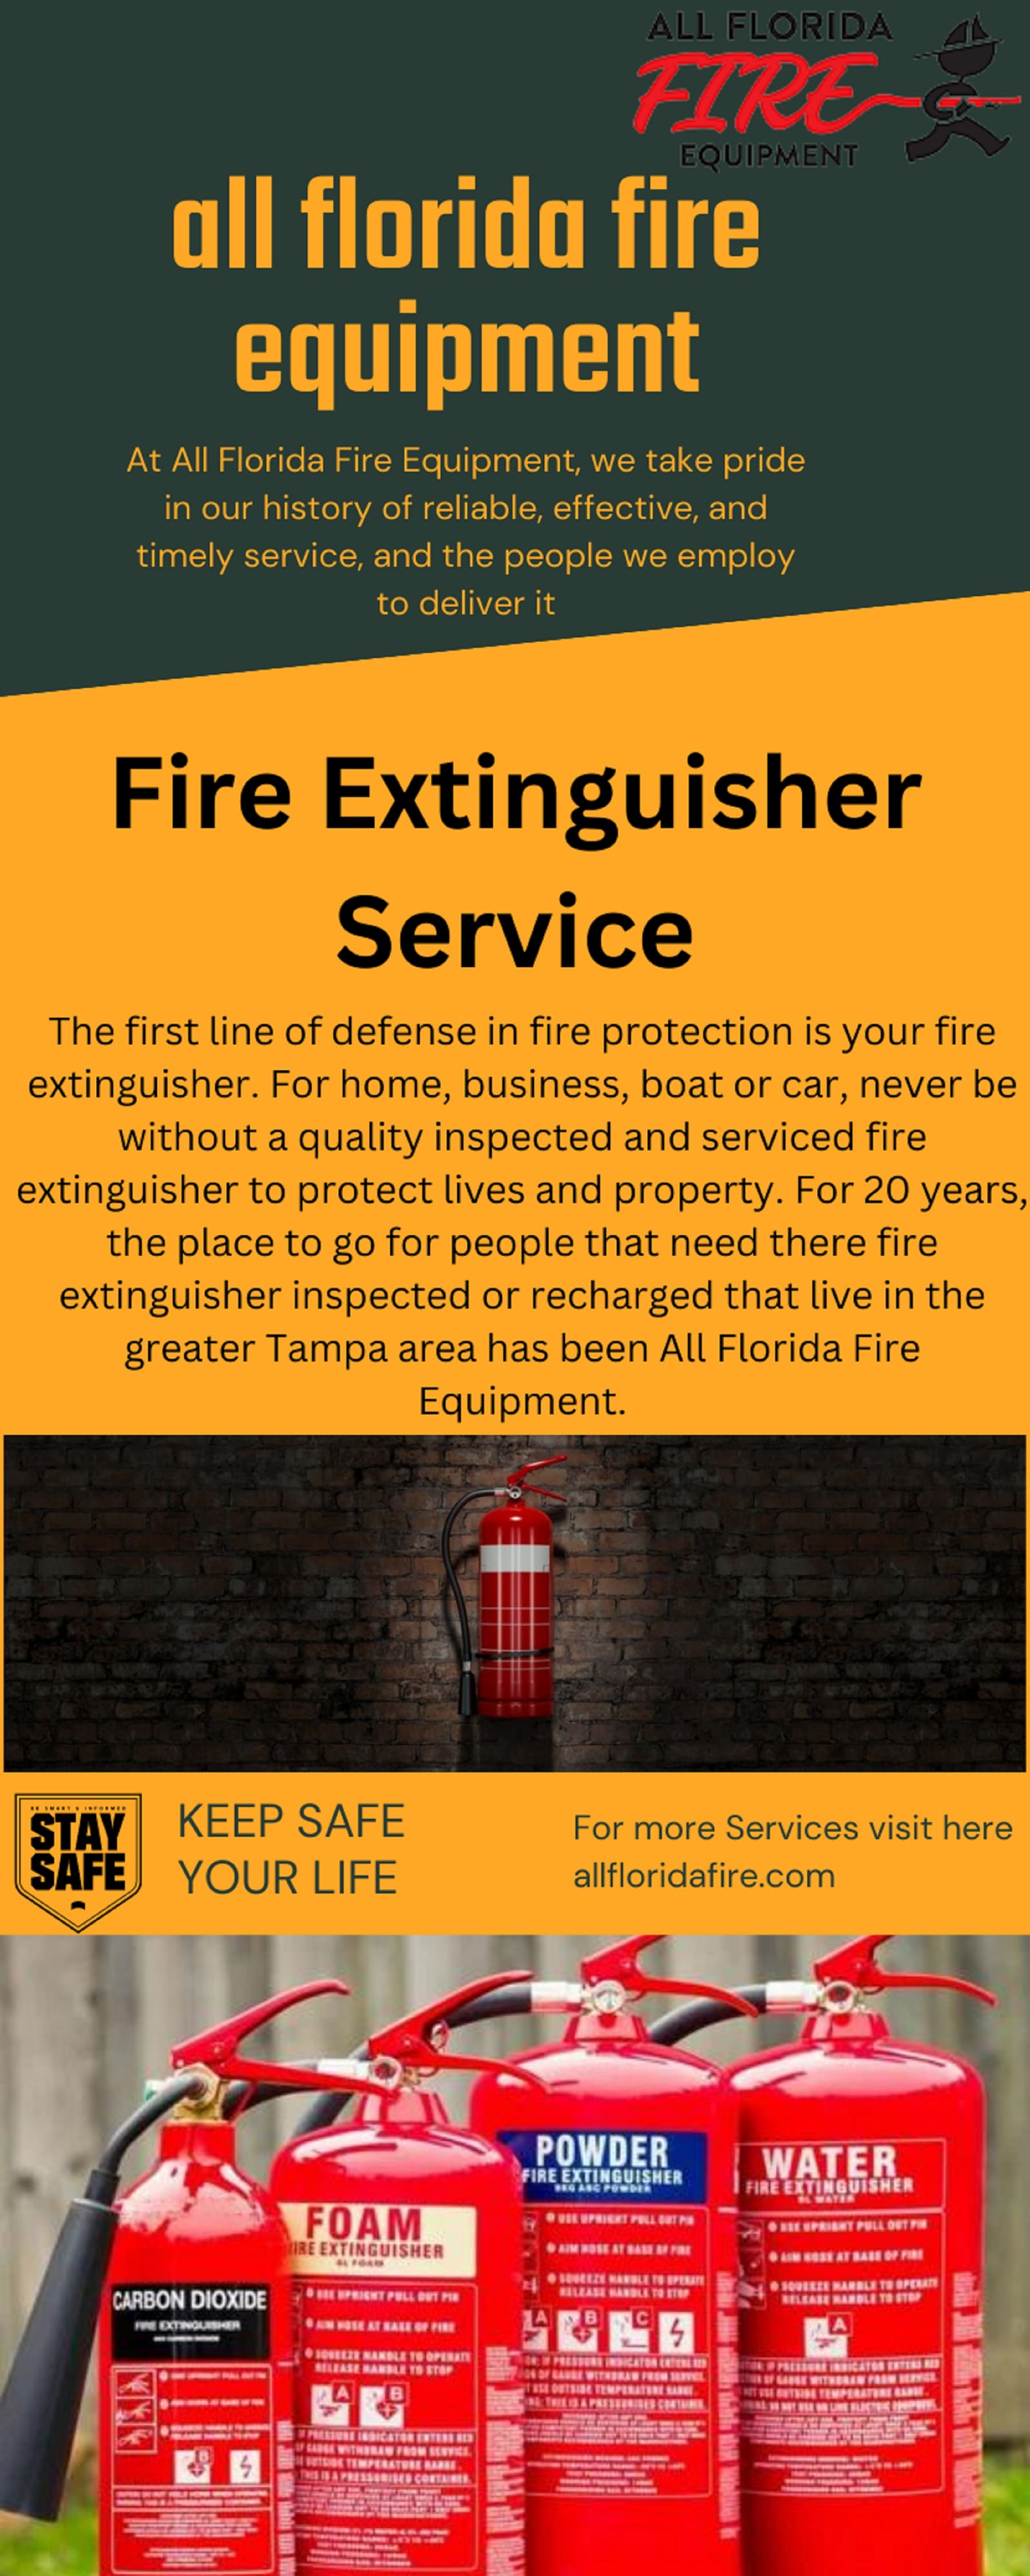 all florida fire
equipment

At All Florida Fire Equipment, we take pride
in our history of reliable, effective, and
timely service, and the people we employ
to deliver it

  
   

 

Fire Extinguisher
Service

The first line of defense in fire protection is your fire
extinguisher. For home, business, boat or car, never be
without a quality inspected and serviced fire
extinguisher to protect lives and property. For 20 years,
the place to go for people that need there fire
extinguisher inspected or recharged that live in the
greater Tampa area has been All Florida Fire
Equipment.

STAY KEEP SAFE For more Services visit here
SAFE) YOUR LIFE allfloridafire.com

  
    
 

il
remit ES

     

  

LL LTTE

CARBON DIOXIDE

   
   

 
 

  

Bai eat) LUTTE ES "|
CET Be
Sere REP erp rere
I — a ee
[4 ppt dol ES